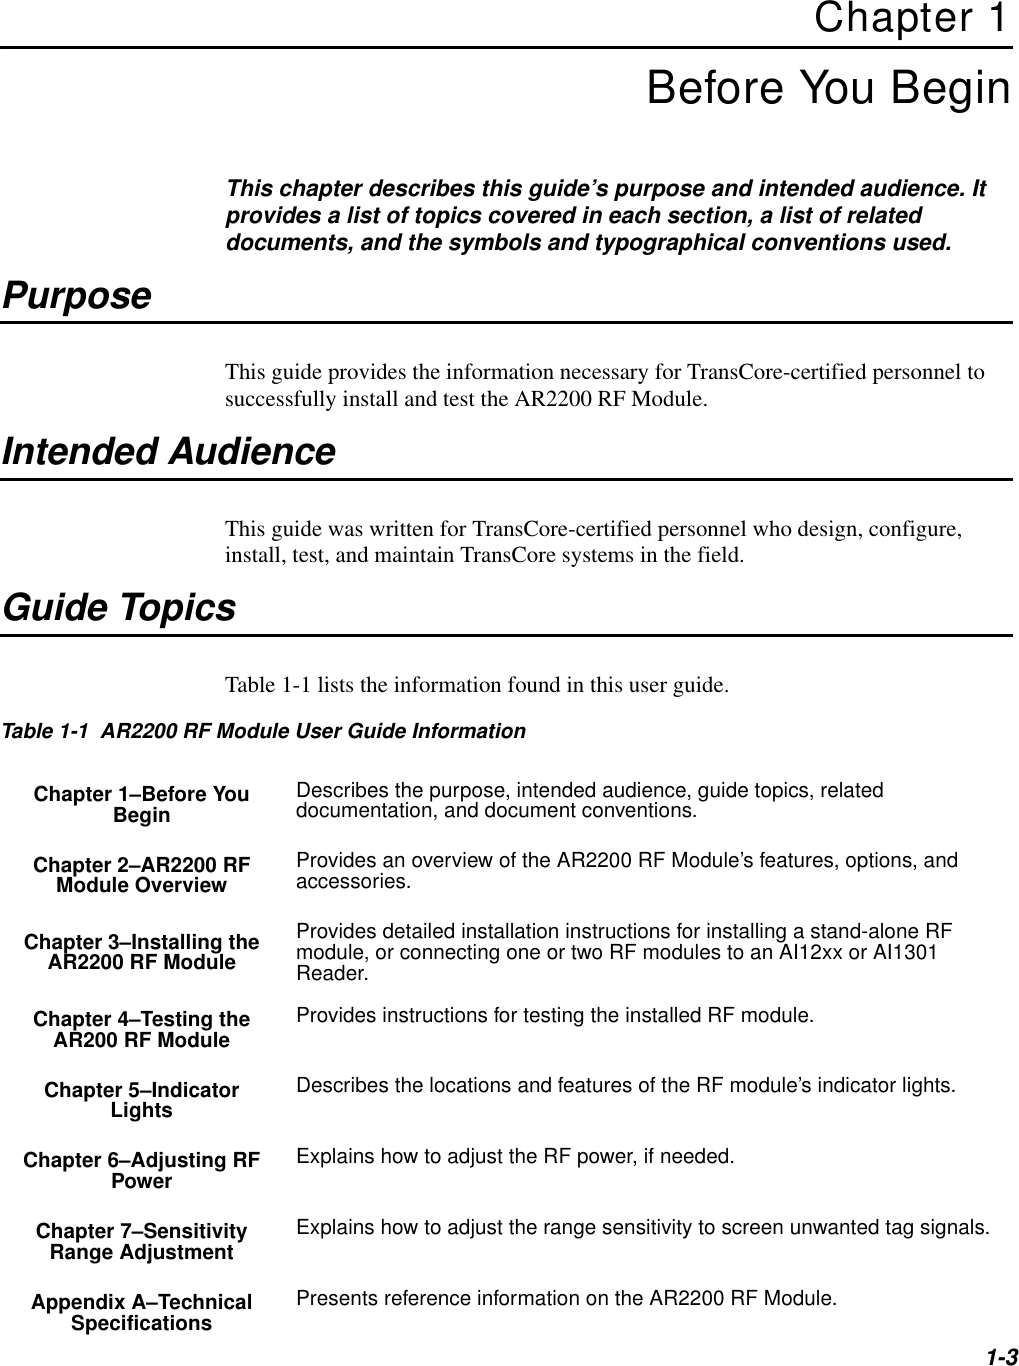 1-3Chapter 1Before You BeginThis chapter describes this guide’s purpose and intended audience. It provides a list of topics covered in each section, a list of related documents, and the symbols and typographical conventions used.PurposeThis guide provides the information necessary for TransCore-certified personnel to successfully install and test the AR2200 RF Module.Intended AudienceThis guide was written for TransCore-certified personnel who design, configure, install, test, and maintain TransCore systems in the field.Guide TopicsTable 1-1 lists the information found in this user guide.Table 1-1  AR2200 RF Module User Guide InformationChapter 1–Before You Begin Describes the purpose, intended audience, guide topics, related documentation, and document conventions.Chapter 2–AR2200 RF Module Overview Provides an overview of the AR2200 RF Module’s features, options, and accessories.Chapter 3–Installing the AR2200 RF ModuleProvides detailed installation instructions for installing a stand-alone RF module, or connecting one or two RF modules to an AI12xx or AI1301 Reader.Chapter 4–Testing the AR200 RF Module Provides instructions for testing the installed RF module.Chapter 5–Indicator Lights Describes the locations and features of the RF module’s indicator lights.Chapter 6–Adjusting RF Power Explains how to adjust the RF power, if needed.Chapter 7–Sensitivity Range Adjustment Explains how to adjust the range sensitivity to screen unwanted tag signals.Appendix A–Technical Specifications Presents reference information on the AR2200 RF Module.